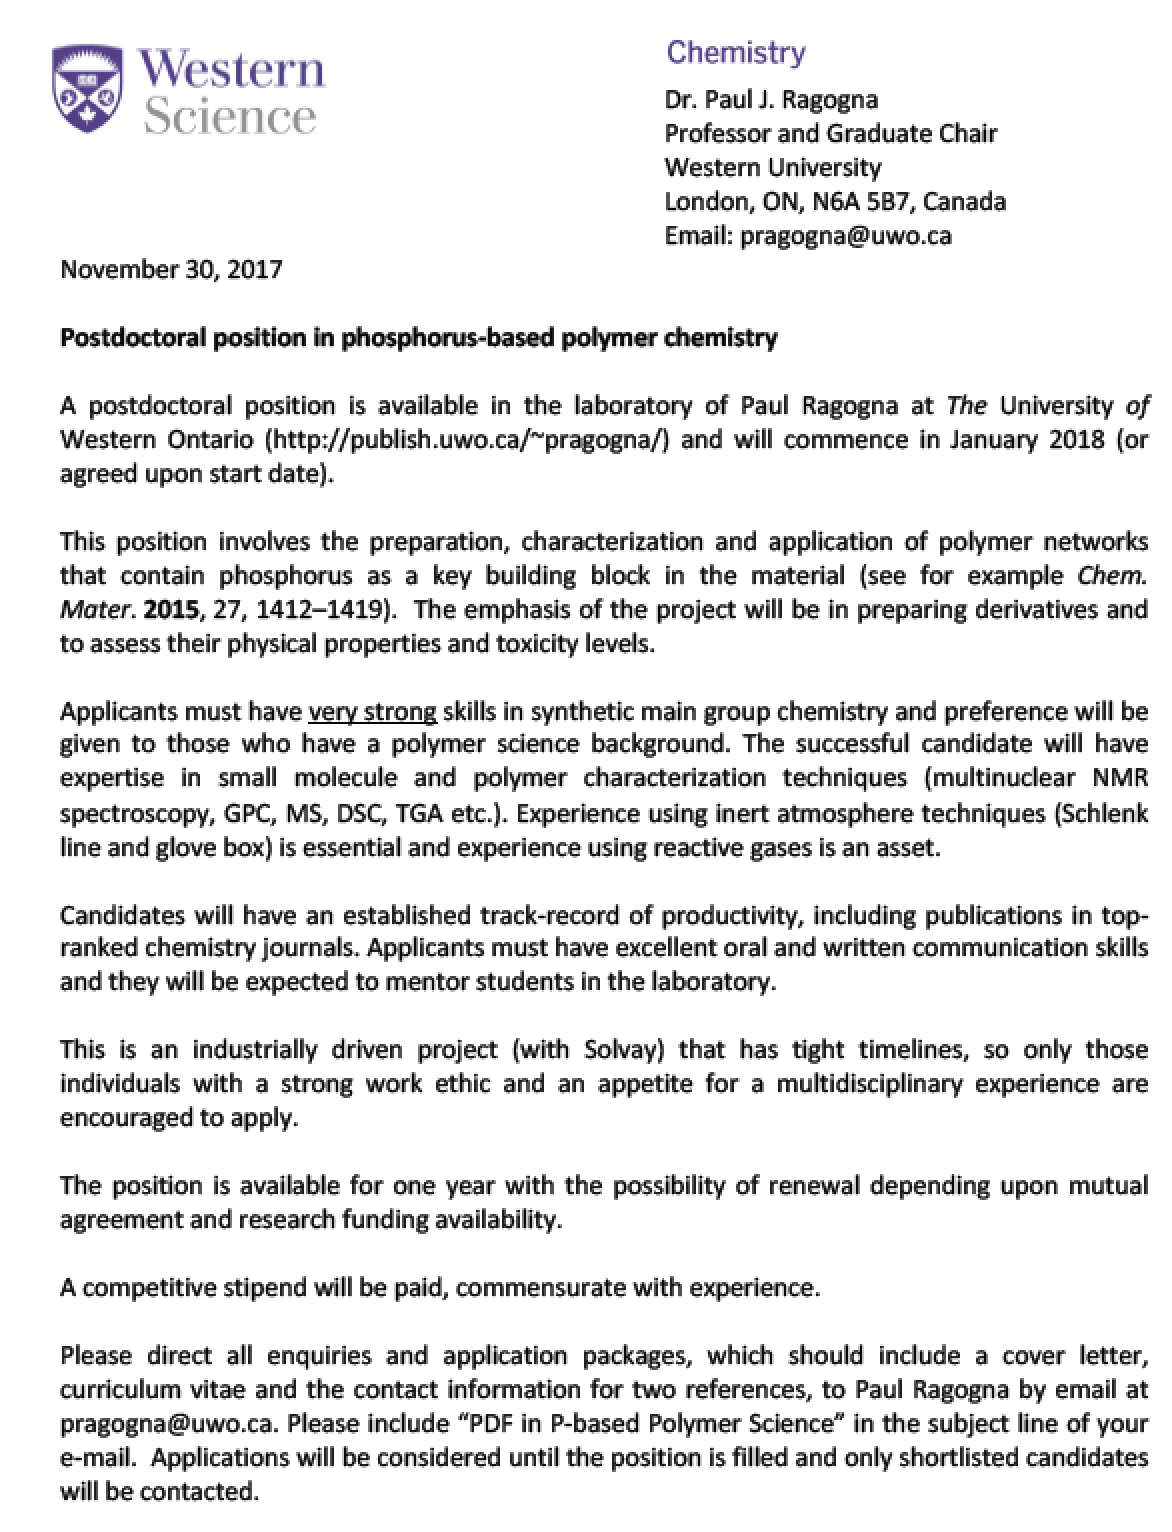 postdoc application cover letter example